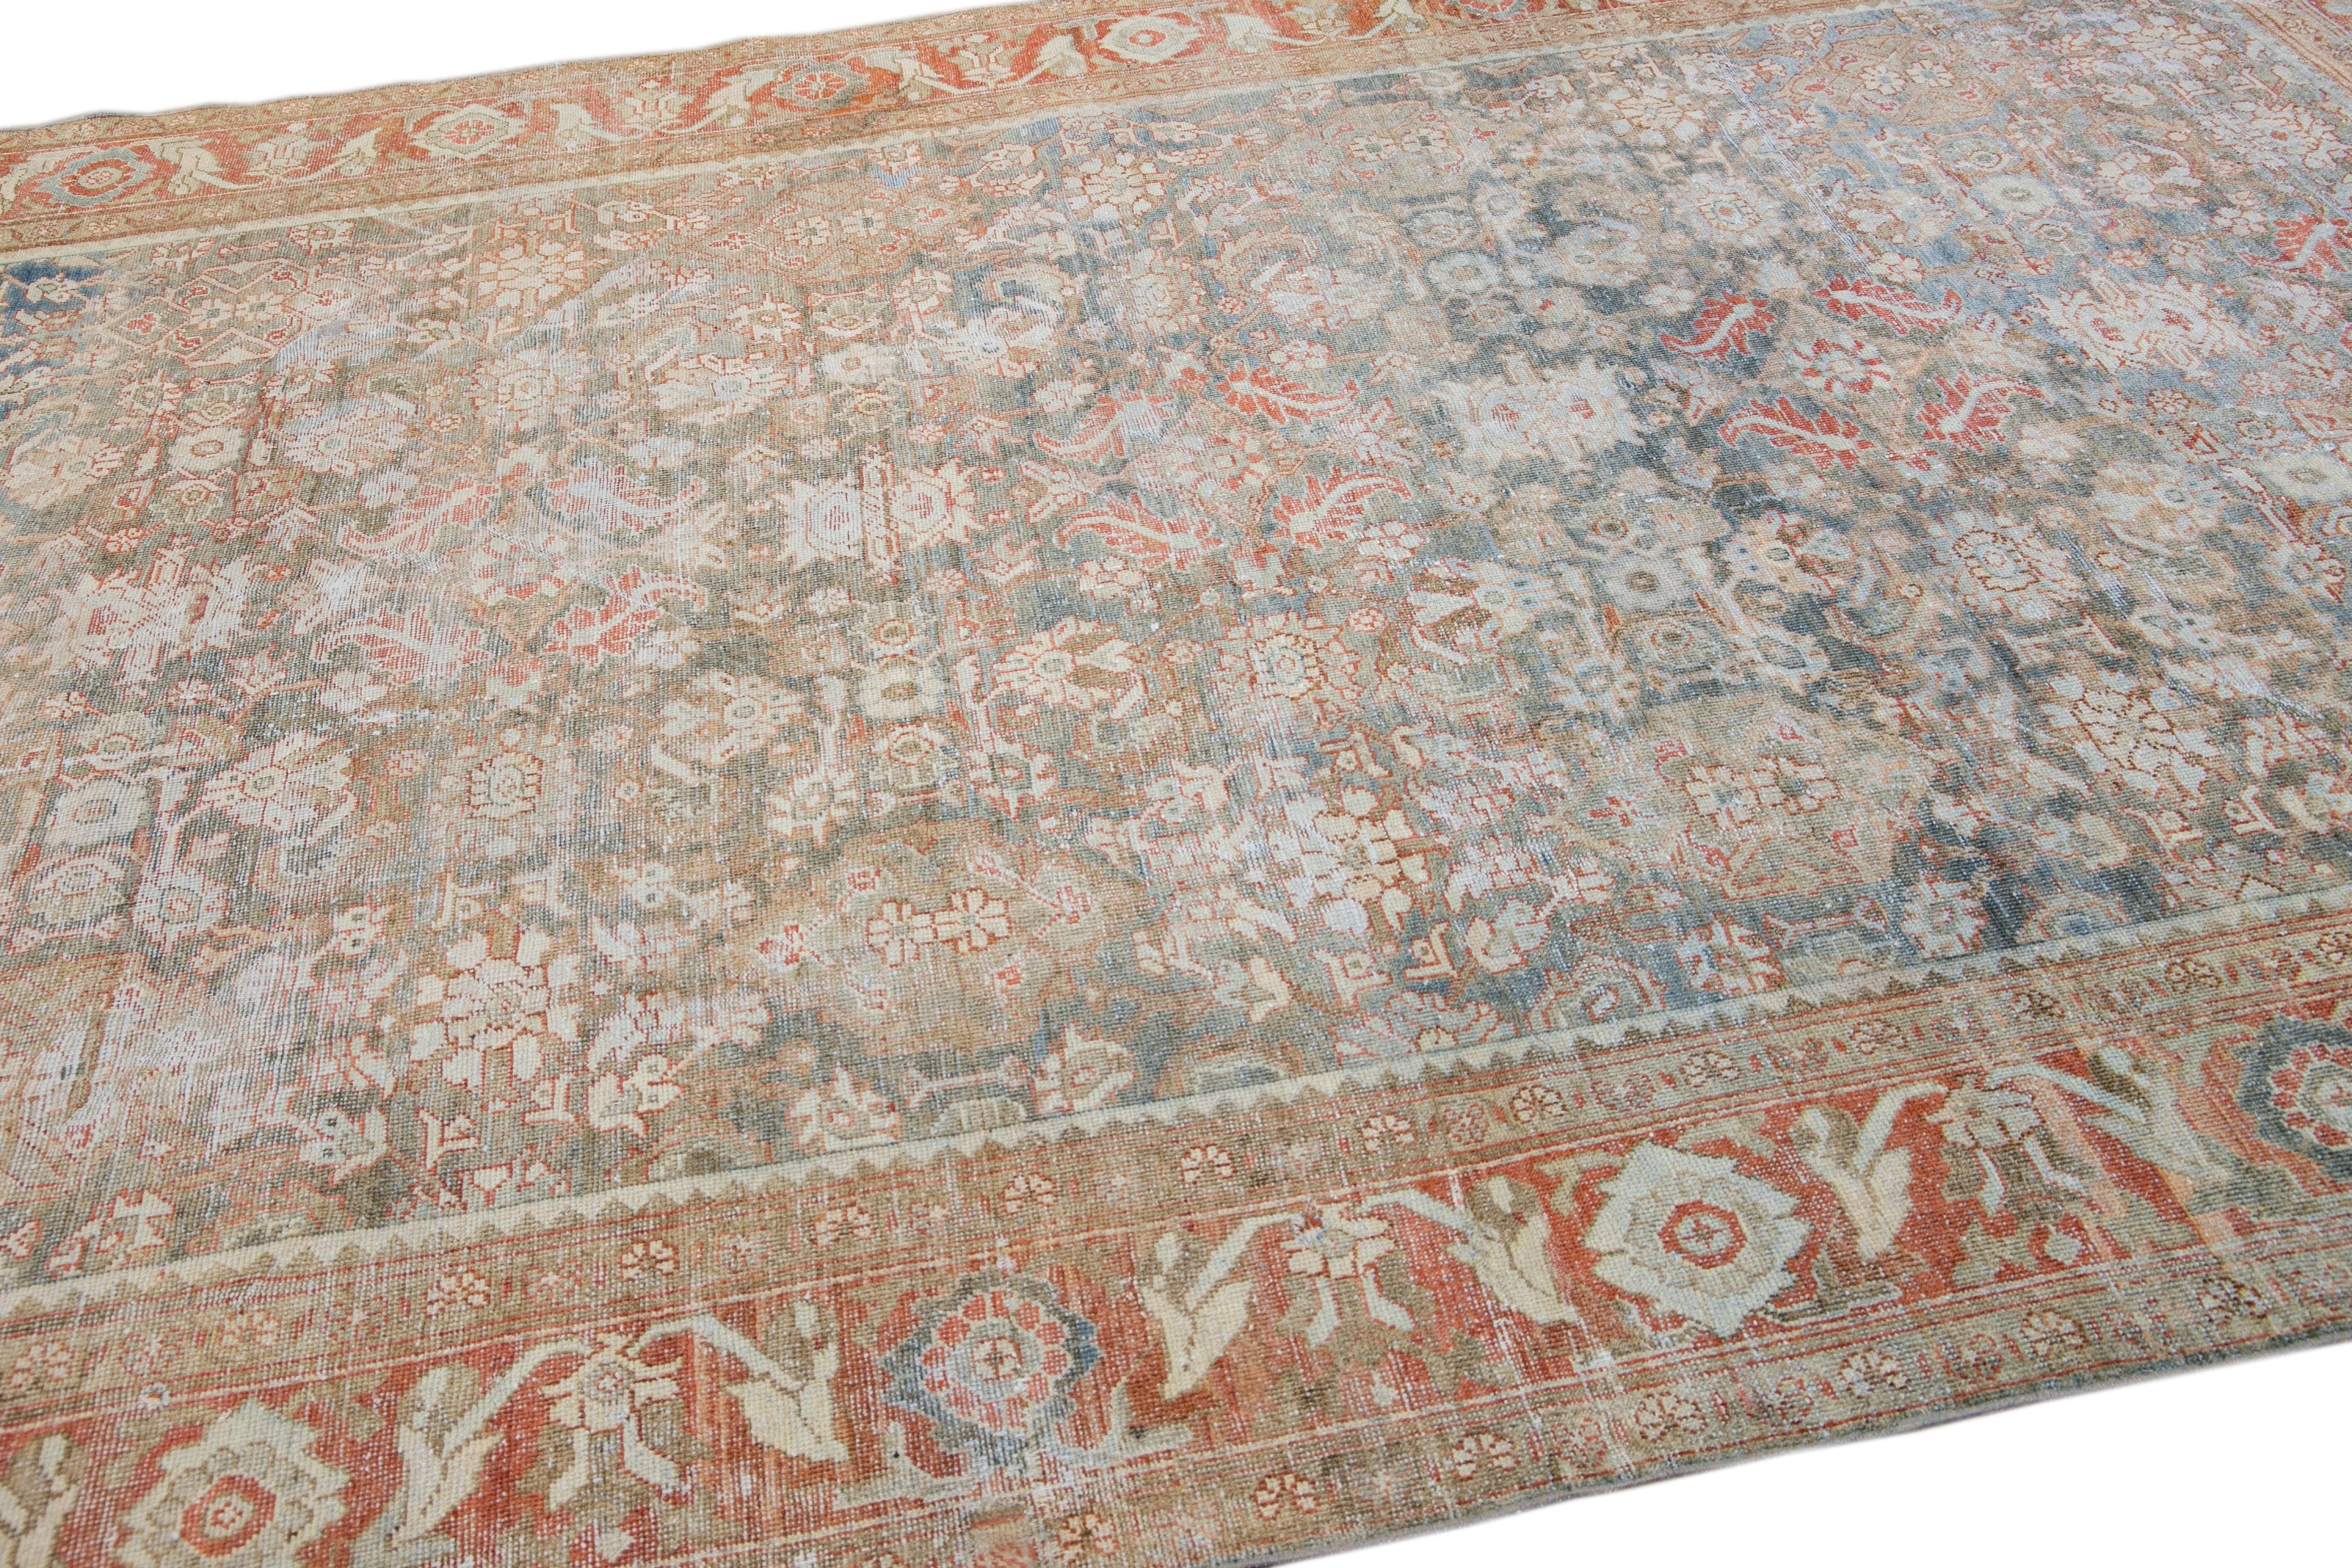 Antique Gray Mahal Handmade Floral Pattern Persian Wool Rug In Good Condition For Sale In Norwalk, CT